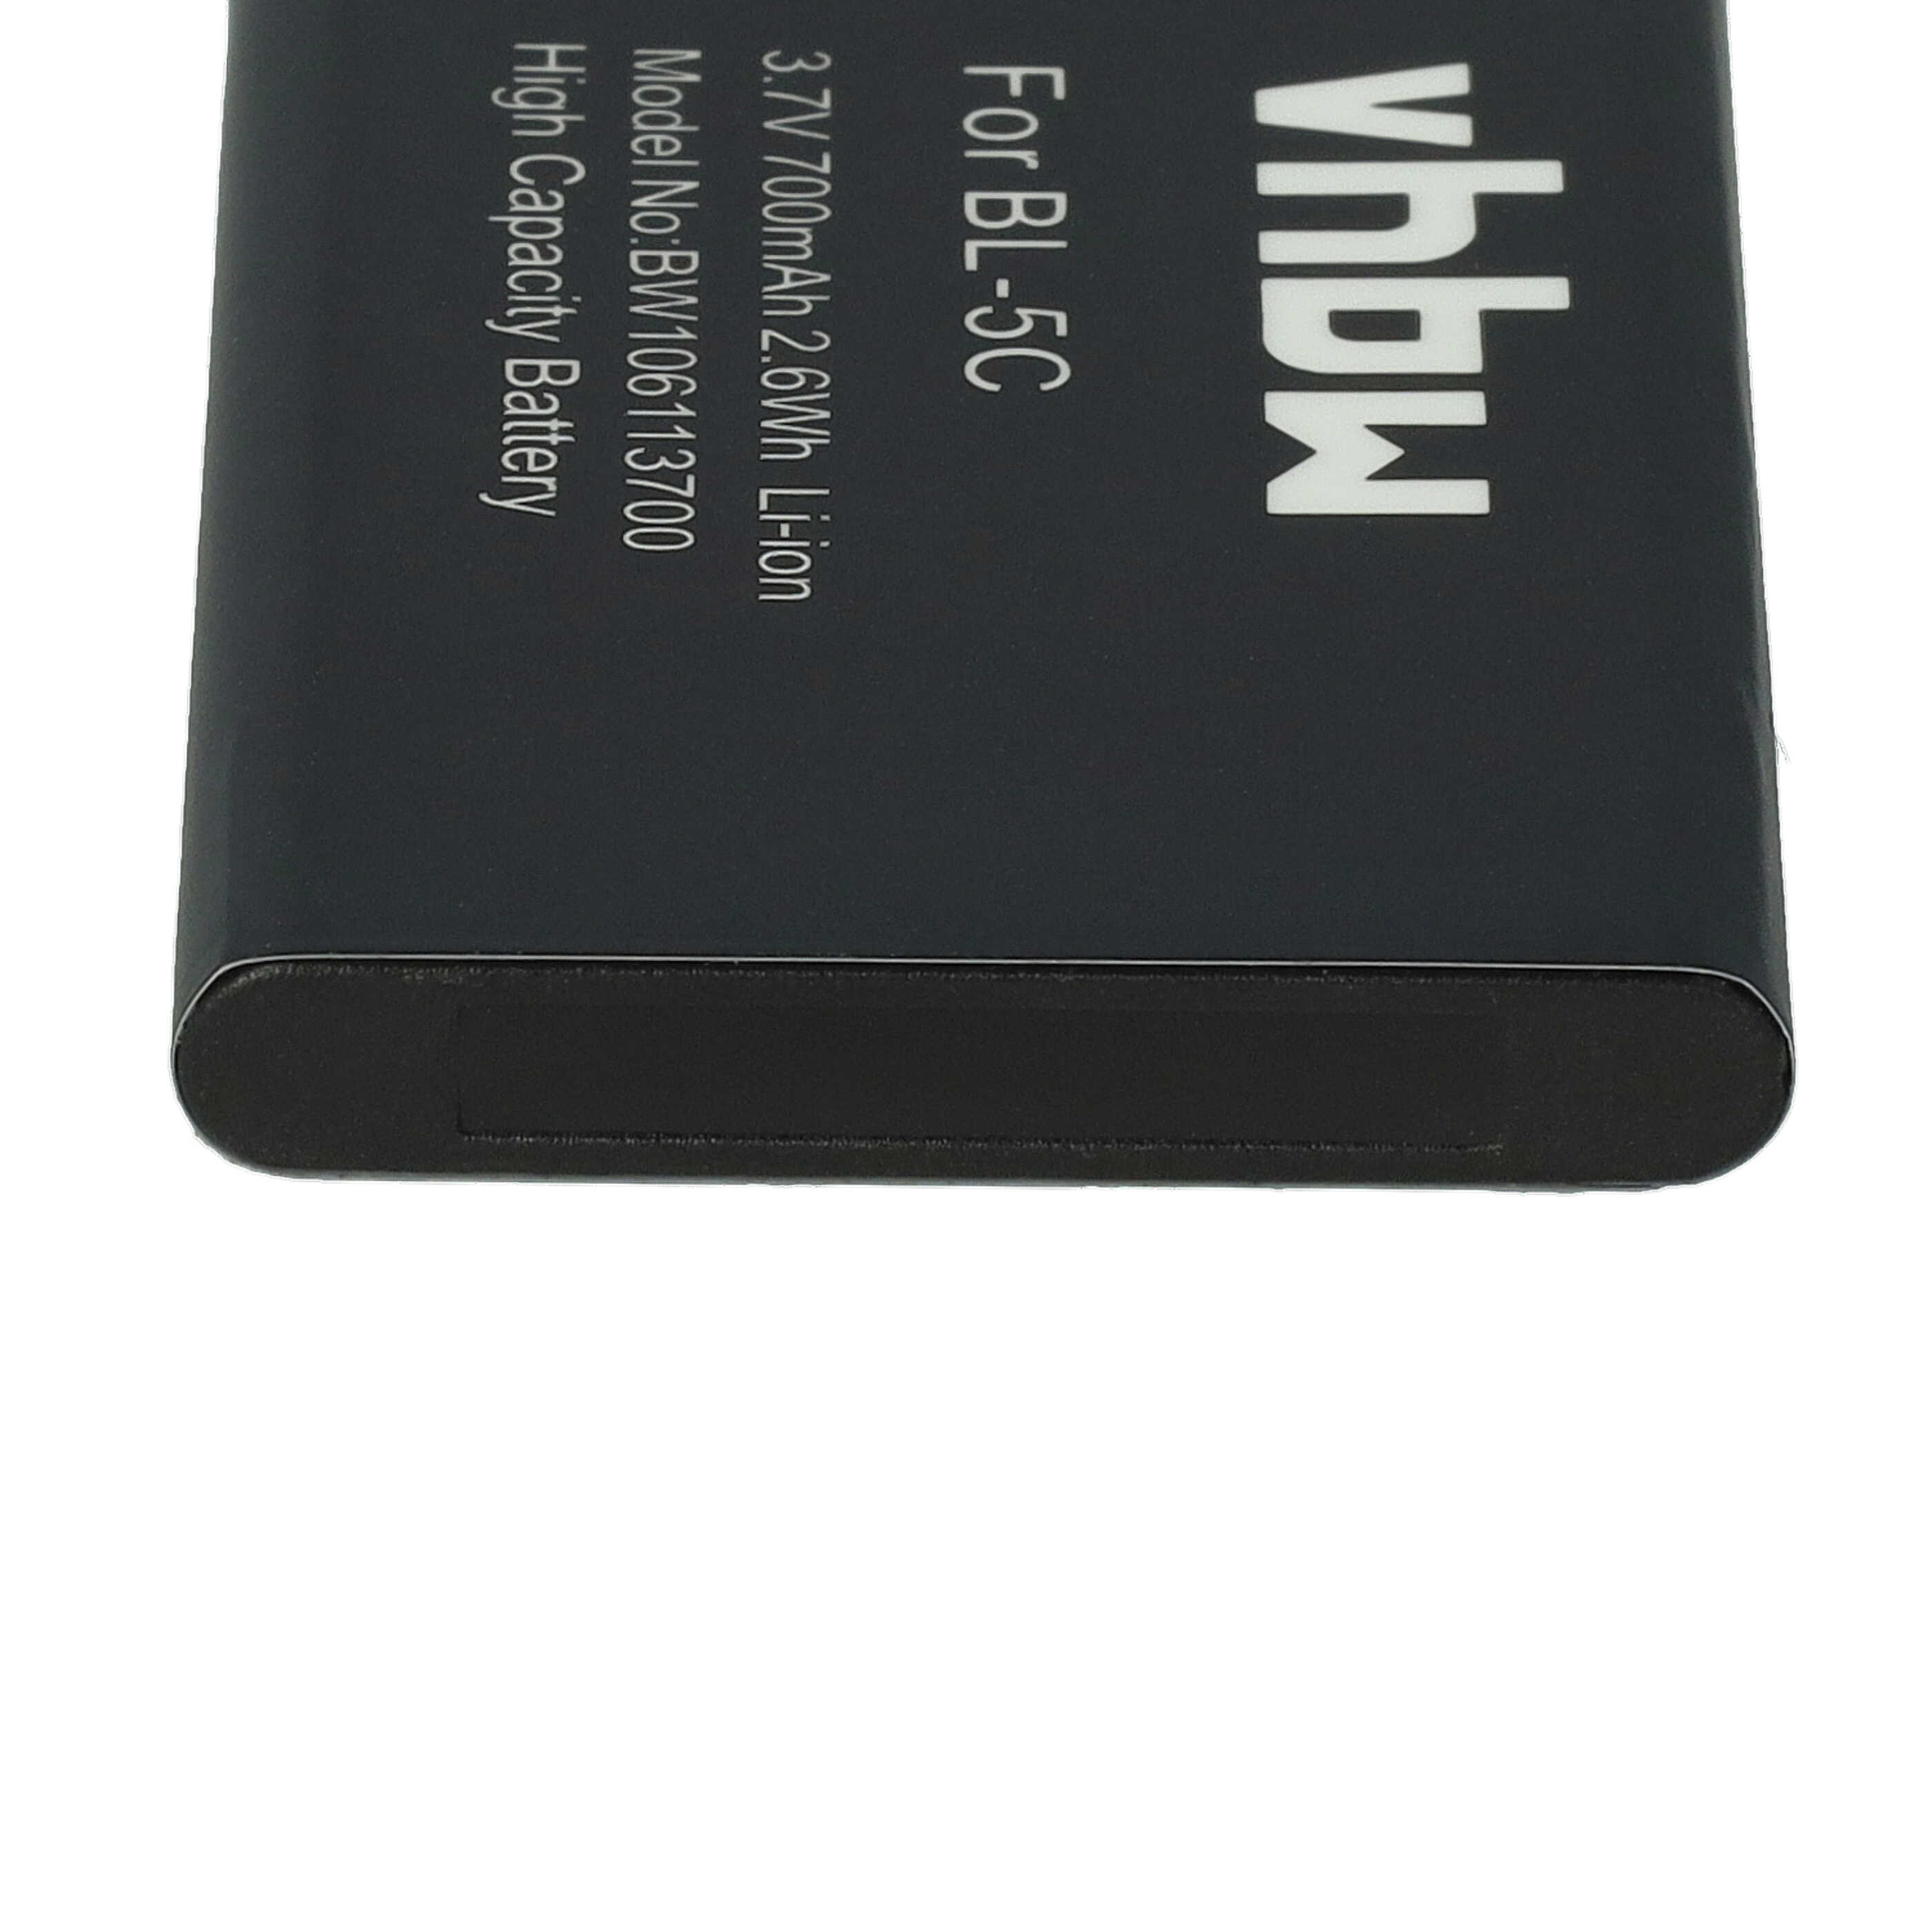 Videocamera Battery Replacement for Aiptek 055 - 700mAh 3.7V Li-Ion